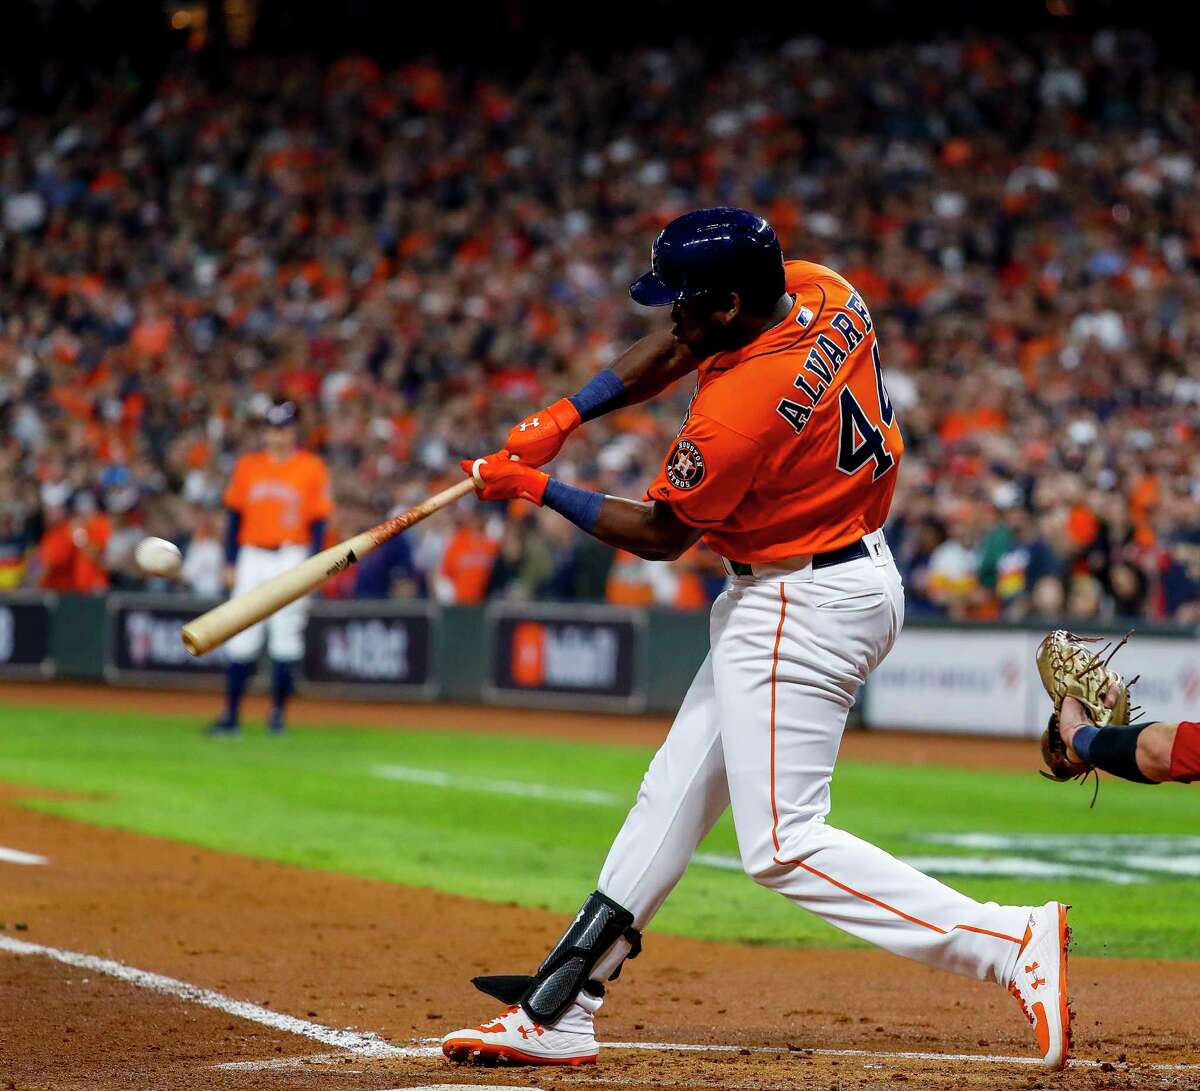 Houston Astros designated hitter Yordan Alvarez (44) hits a single to right field during the second inning of Game 7 of the World Series at Minute Maid Park on Wednesday, Oct. 30, 2019, in Houston.